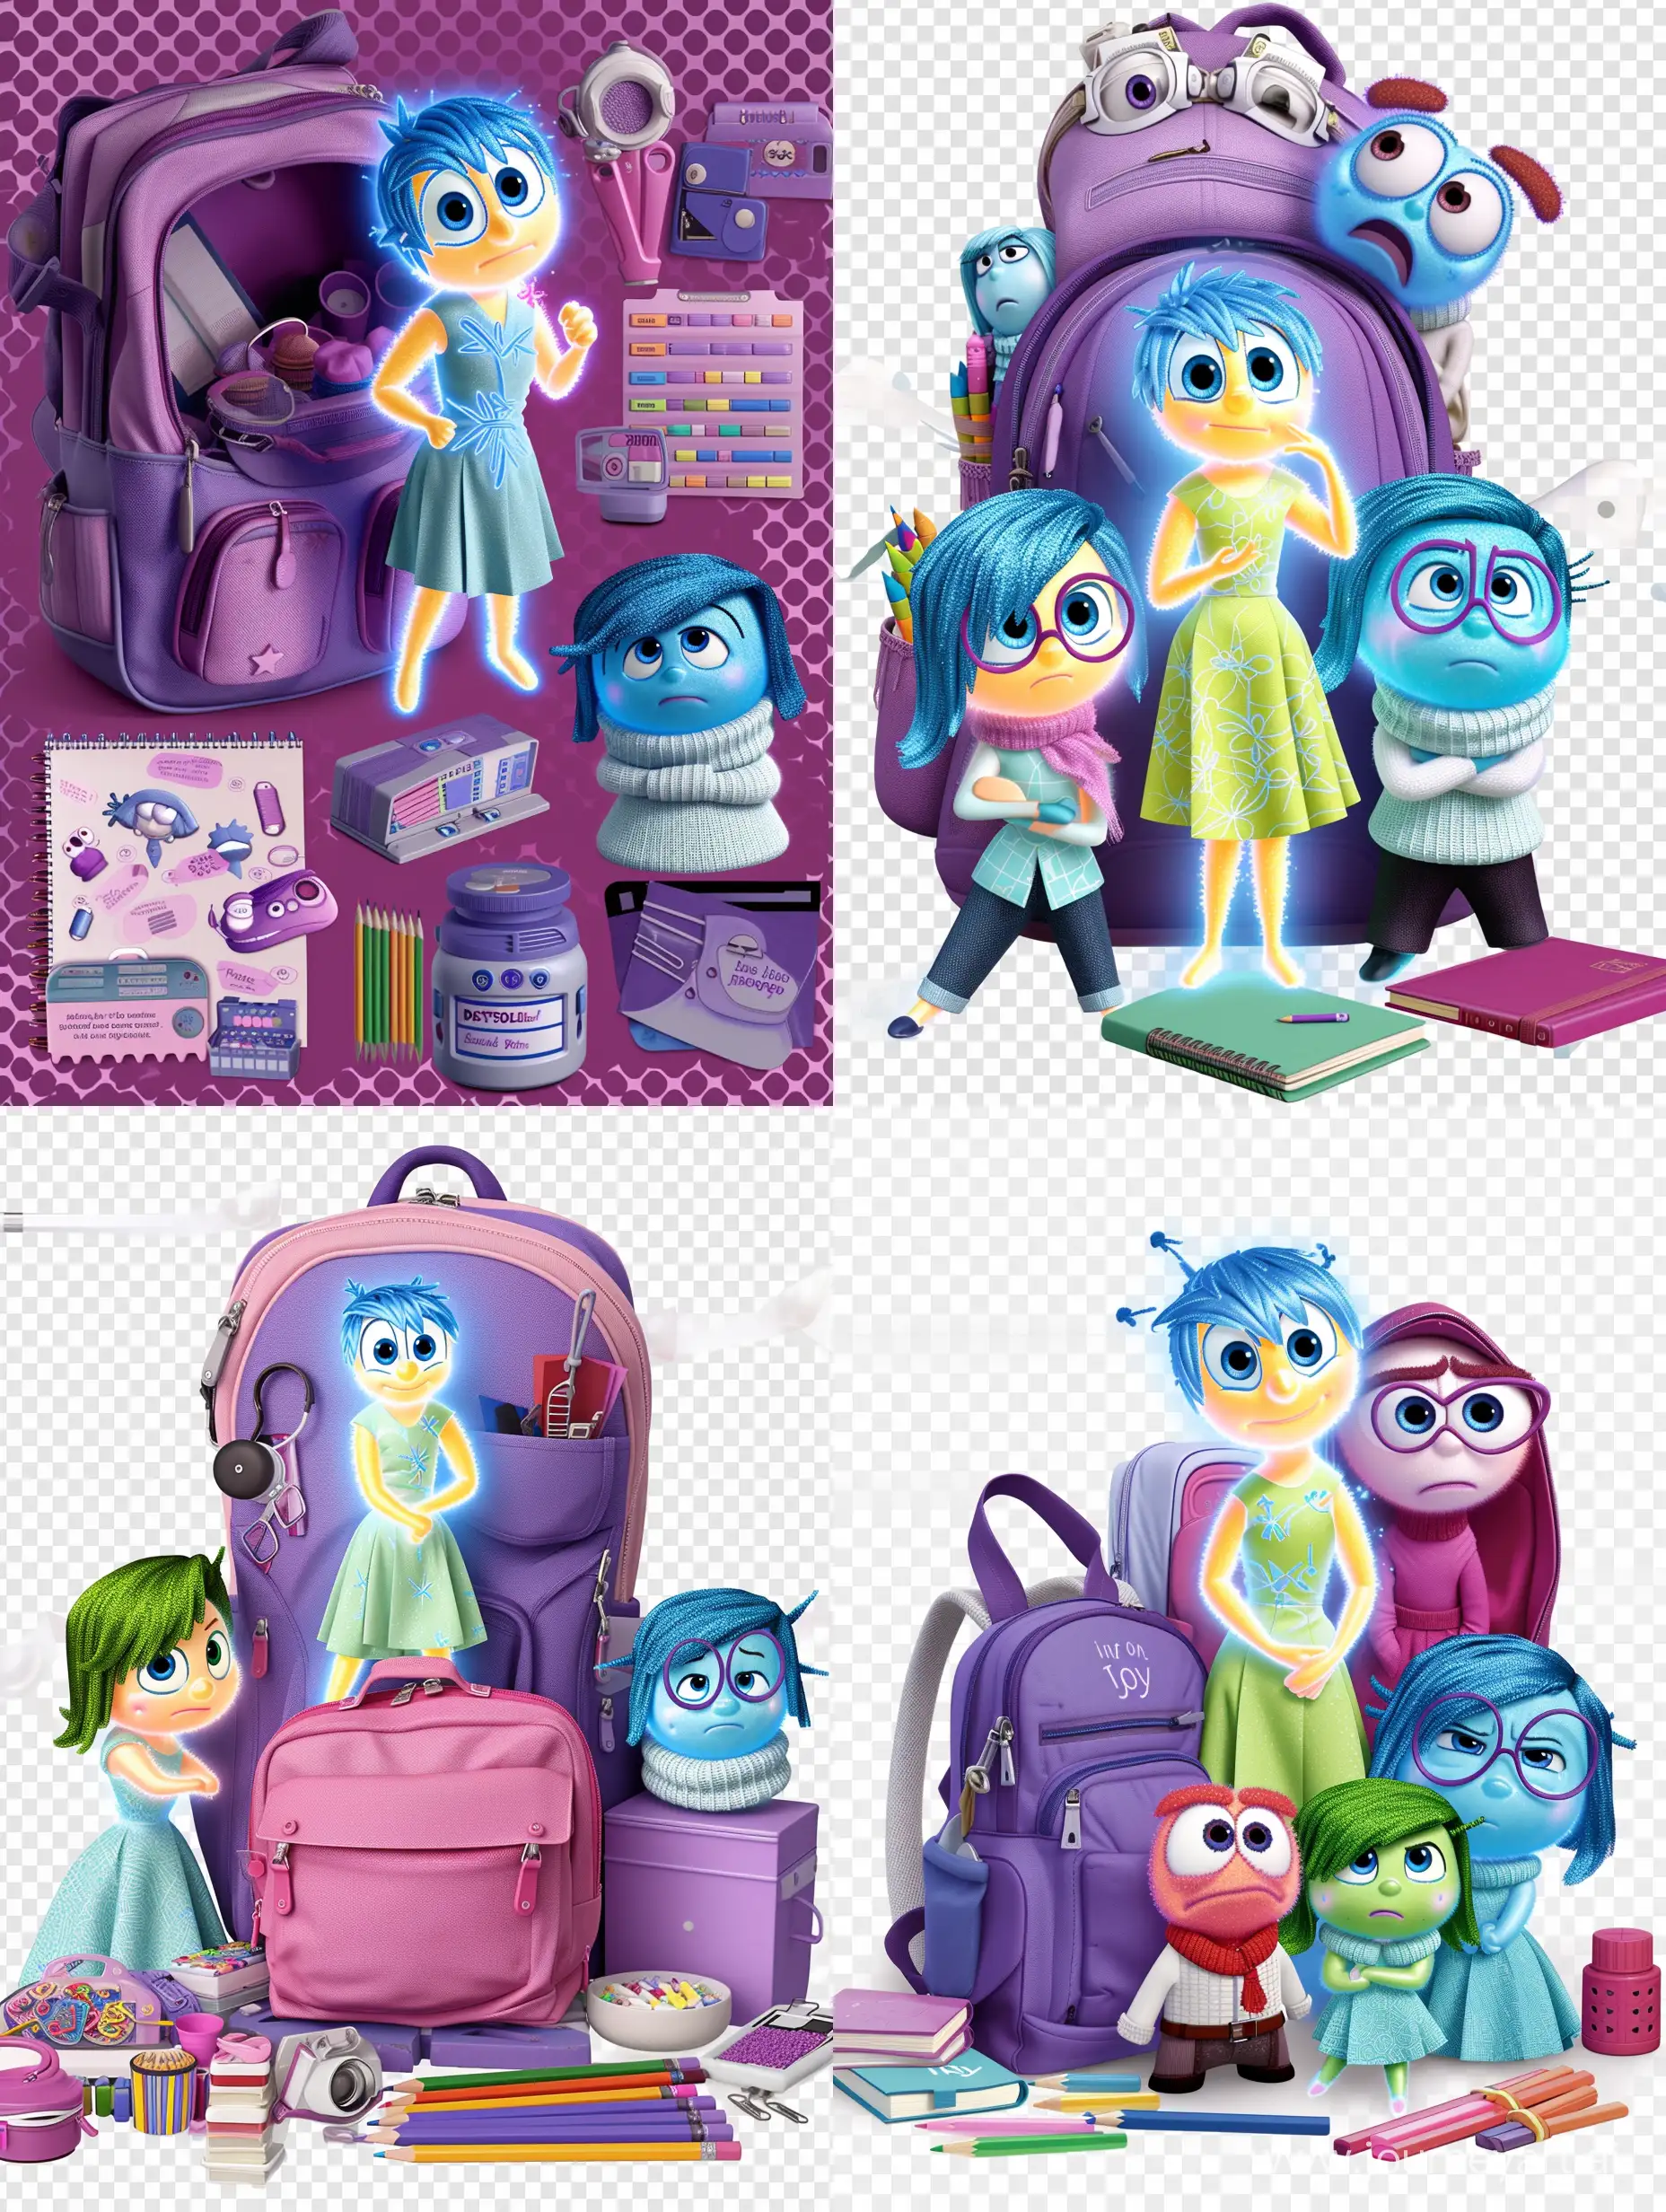 Inside-Out-Characters-BacktoSchool-with-Purple-and-Pink-School-Supplies